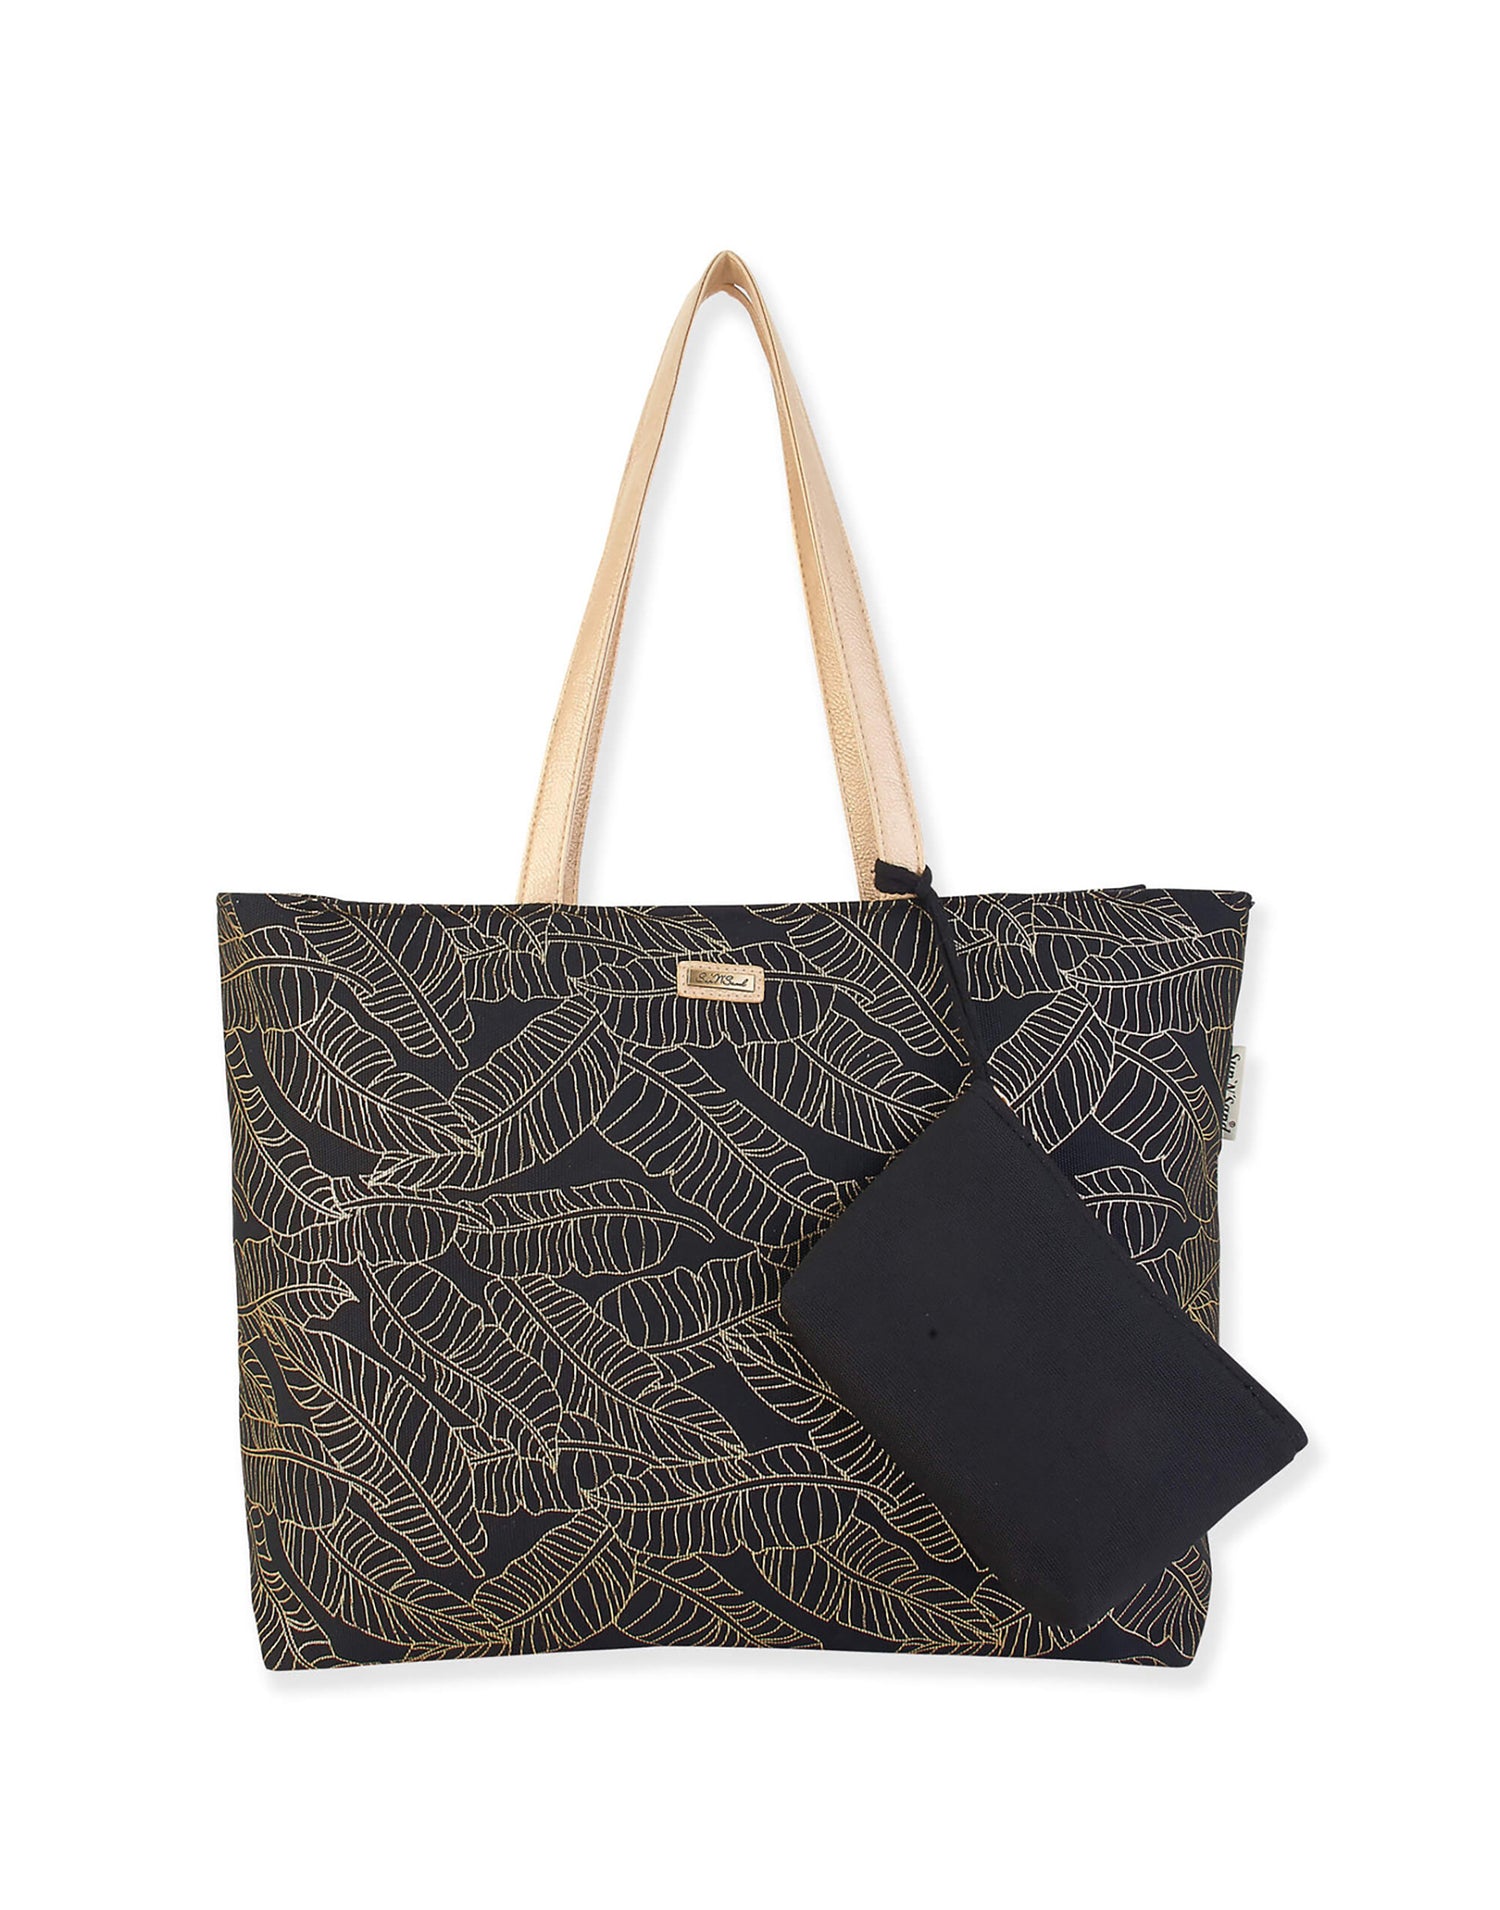 Shiloh Beach Shoulder Tote by Sun N Sand in Black - Front View